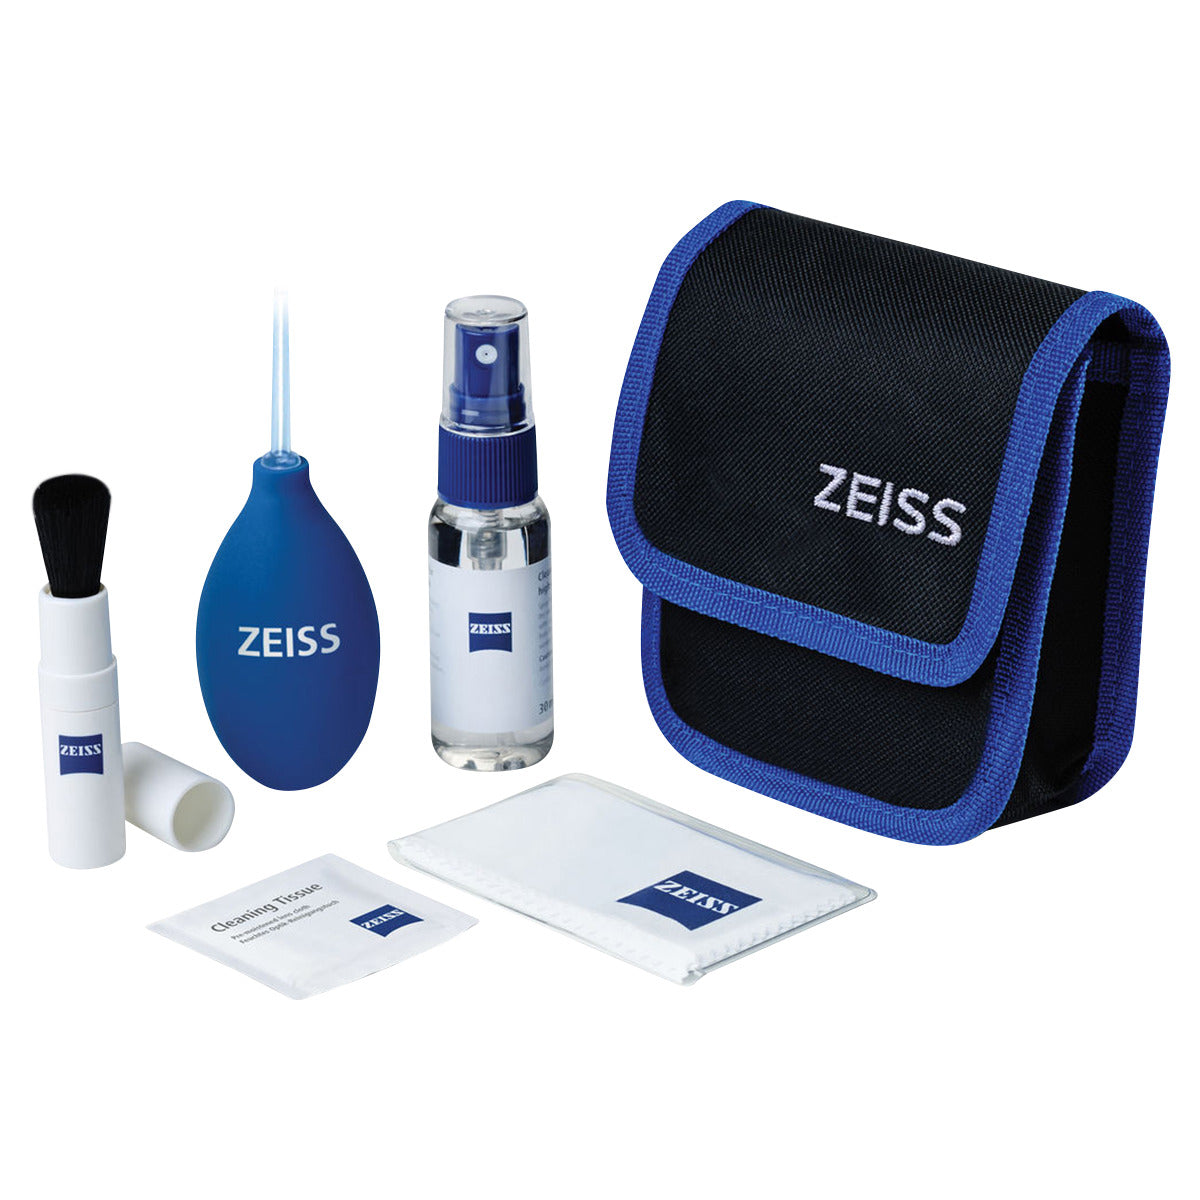 Zeiss Premium Lens Cleaning Kit in Zeiss Premium Lens Cleaning Kit by Zeiss | Optics - goHUNT Shop by GOHUNT | Zeiss - GOHUNT Shop